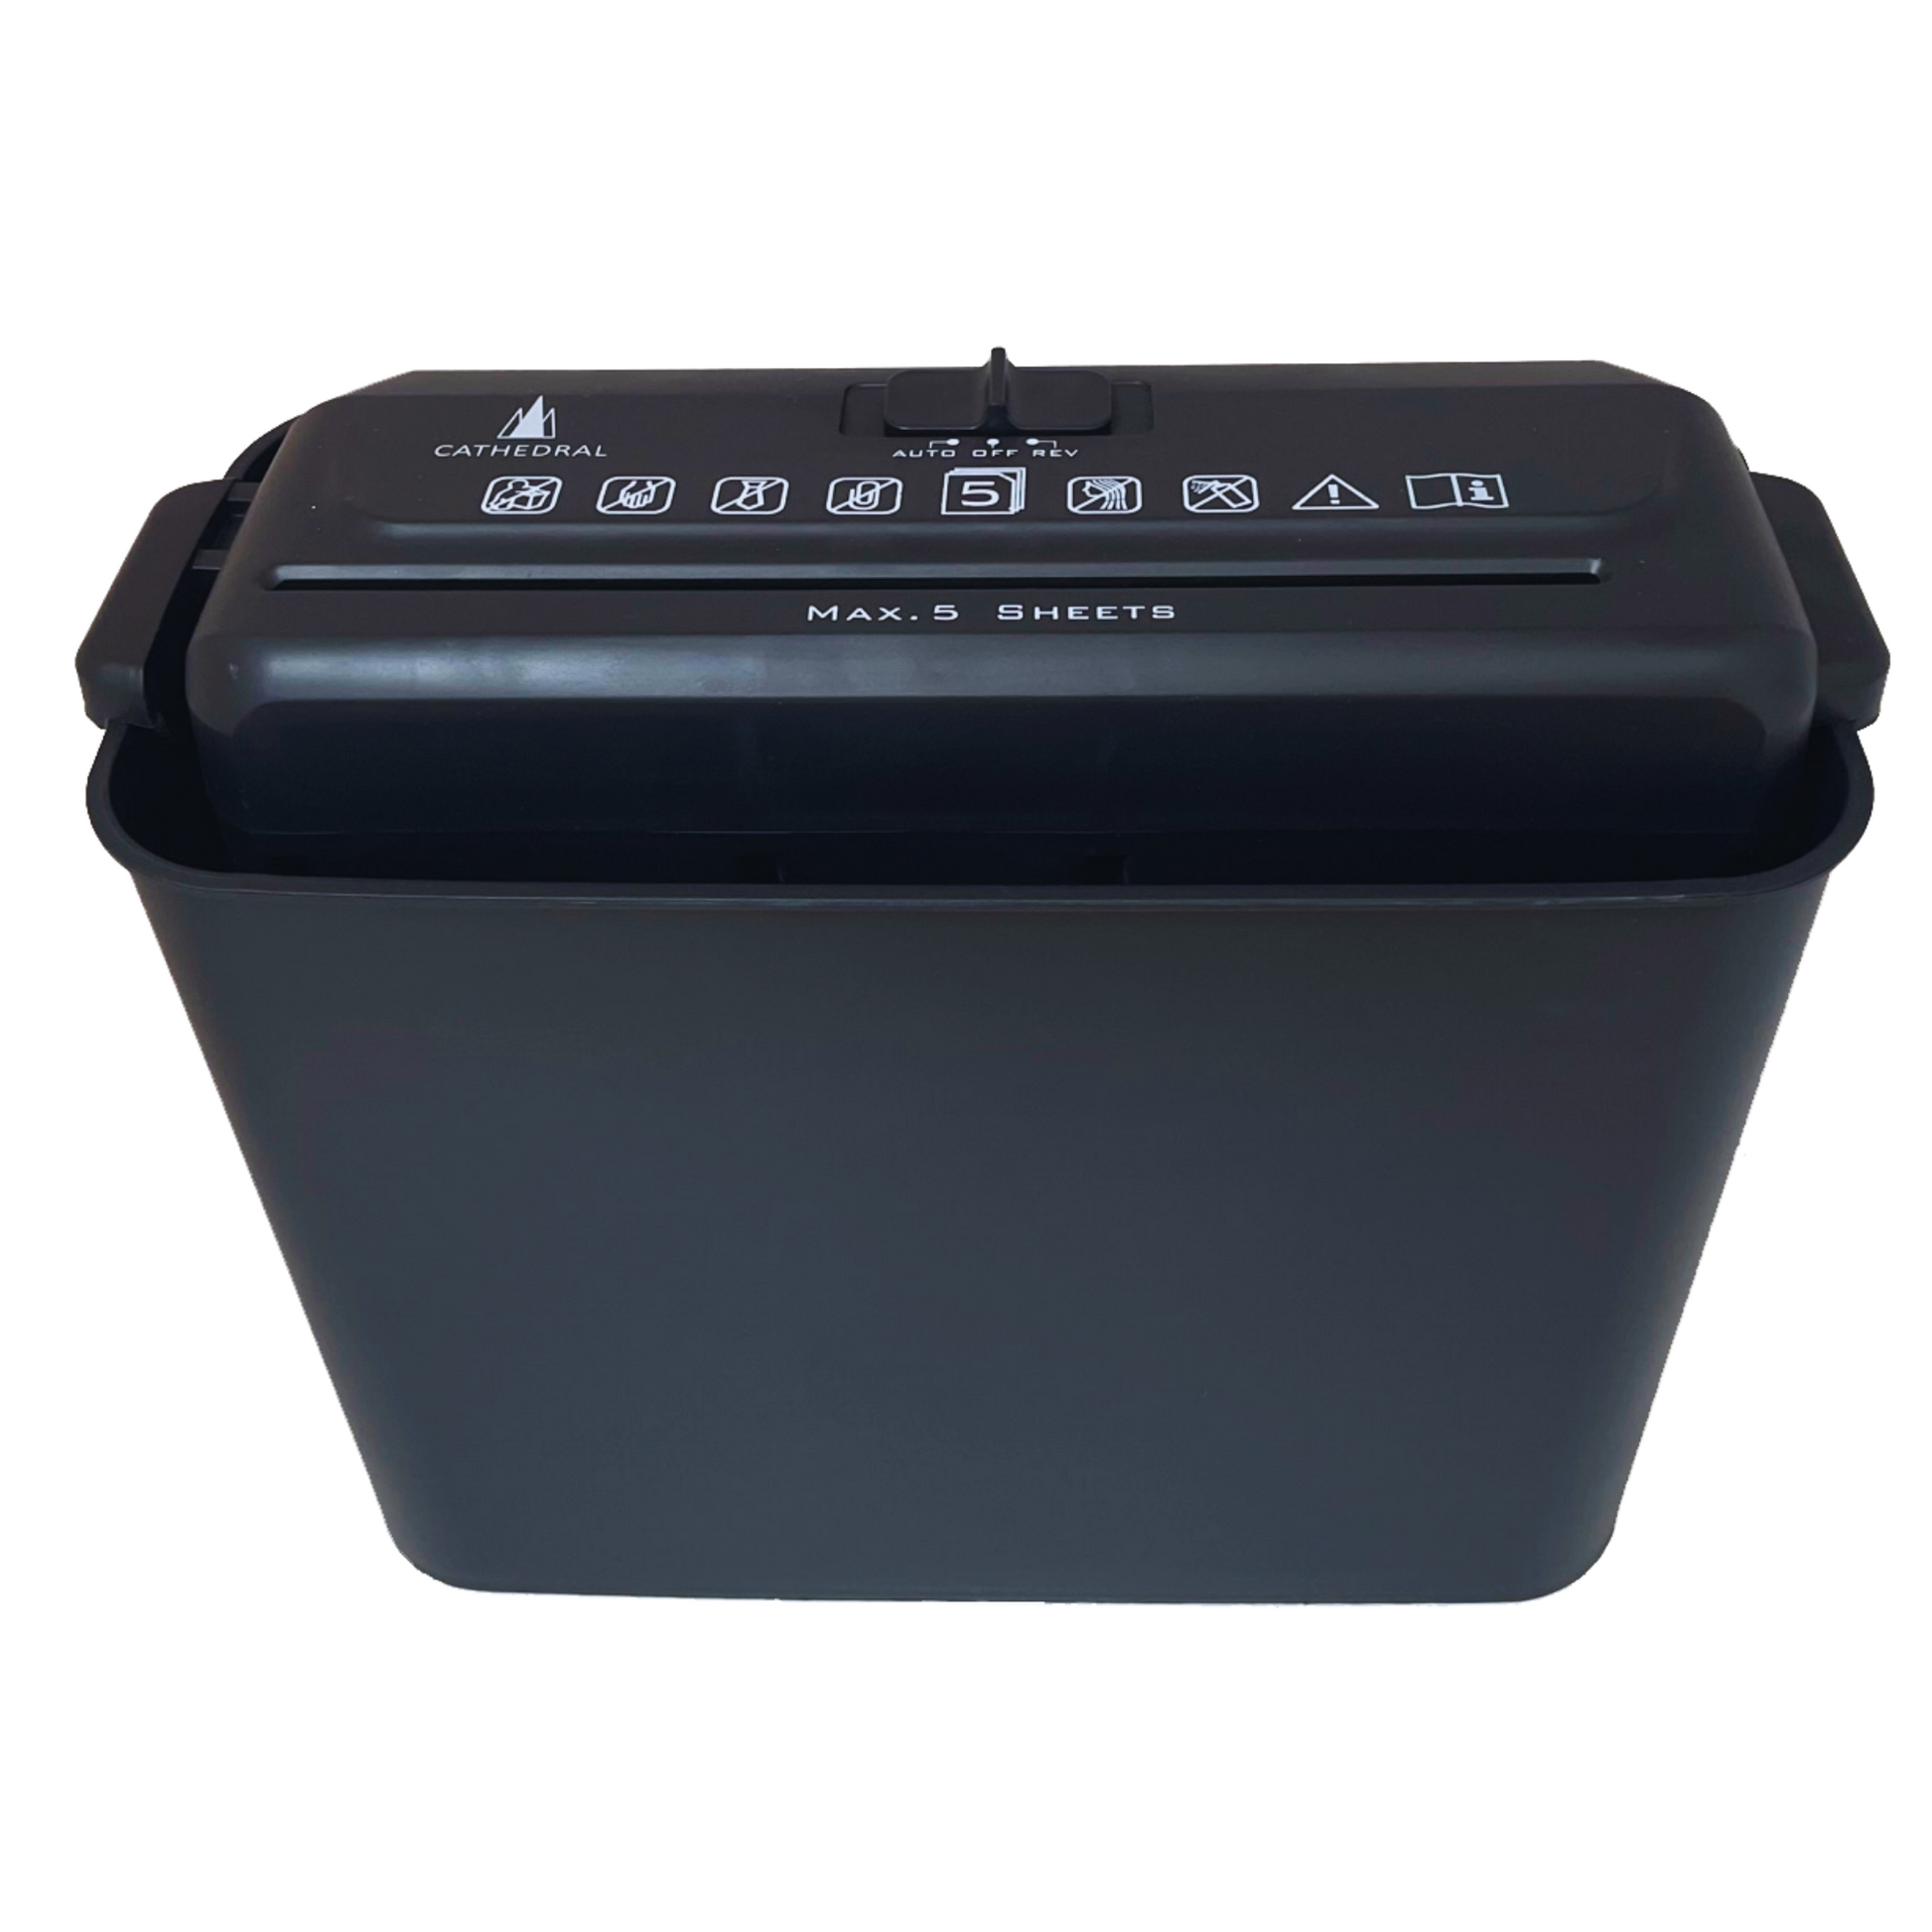 Black Cathedral Products strip-cut shredder with a 5-sheet capacity, featuring a simple control panel with icons for power, auto, and reverse functions.